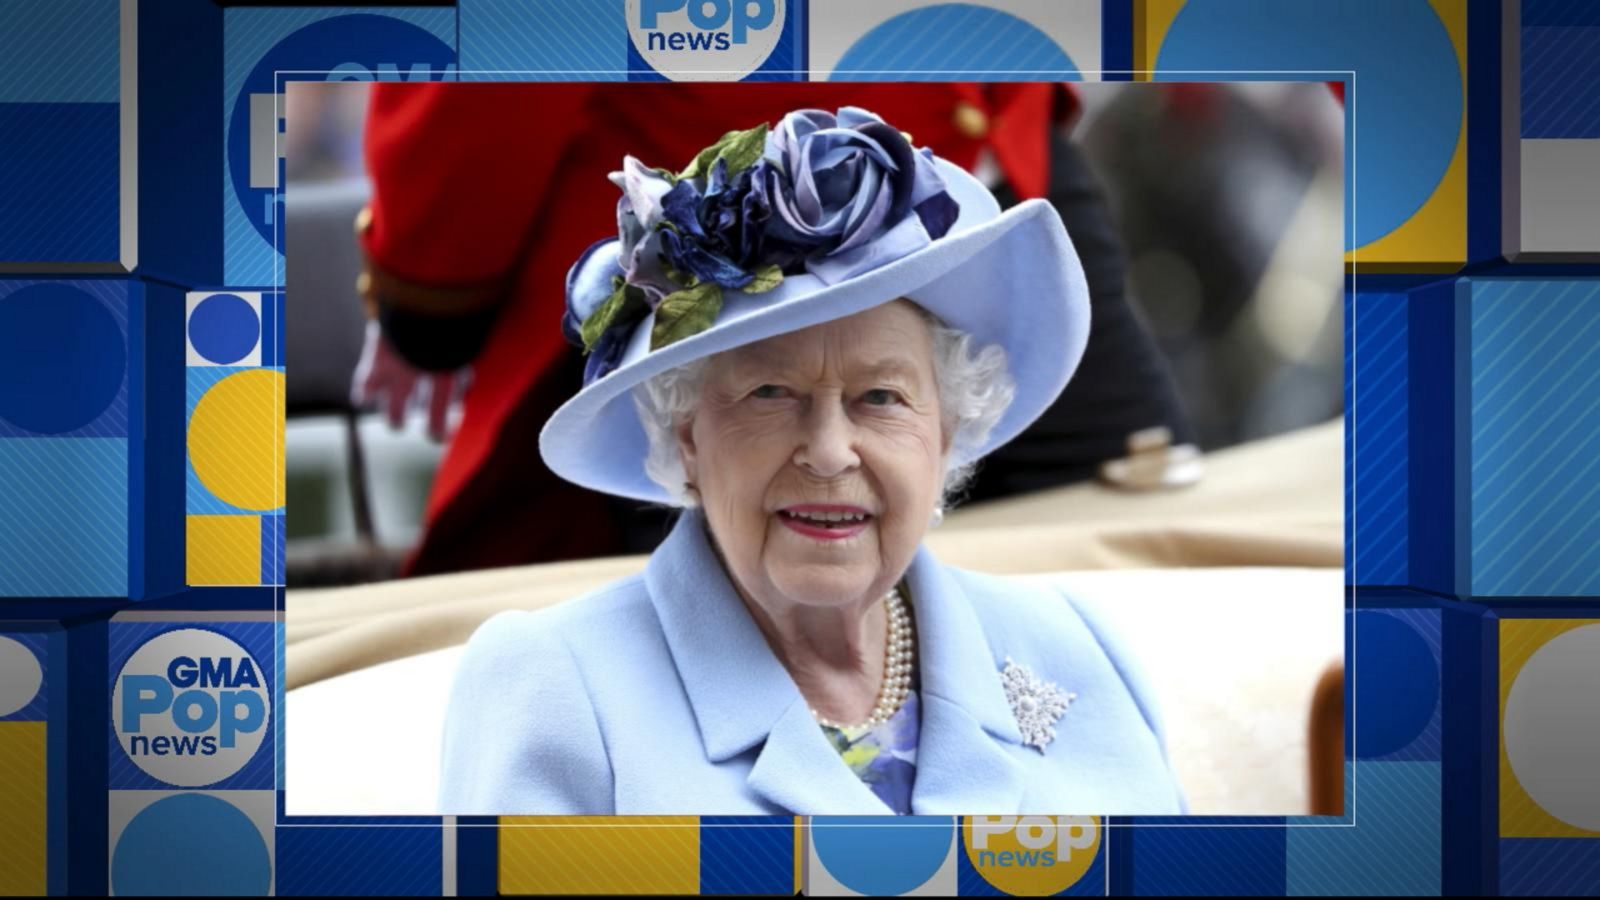 VIDEO: Queen Elizabeth turns property into public drive-in movie theater